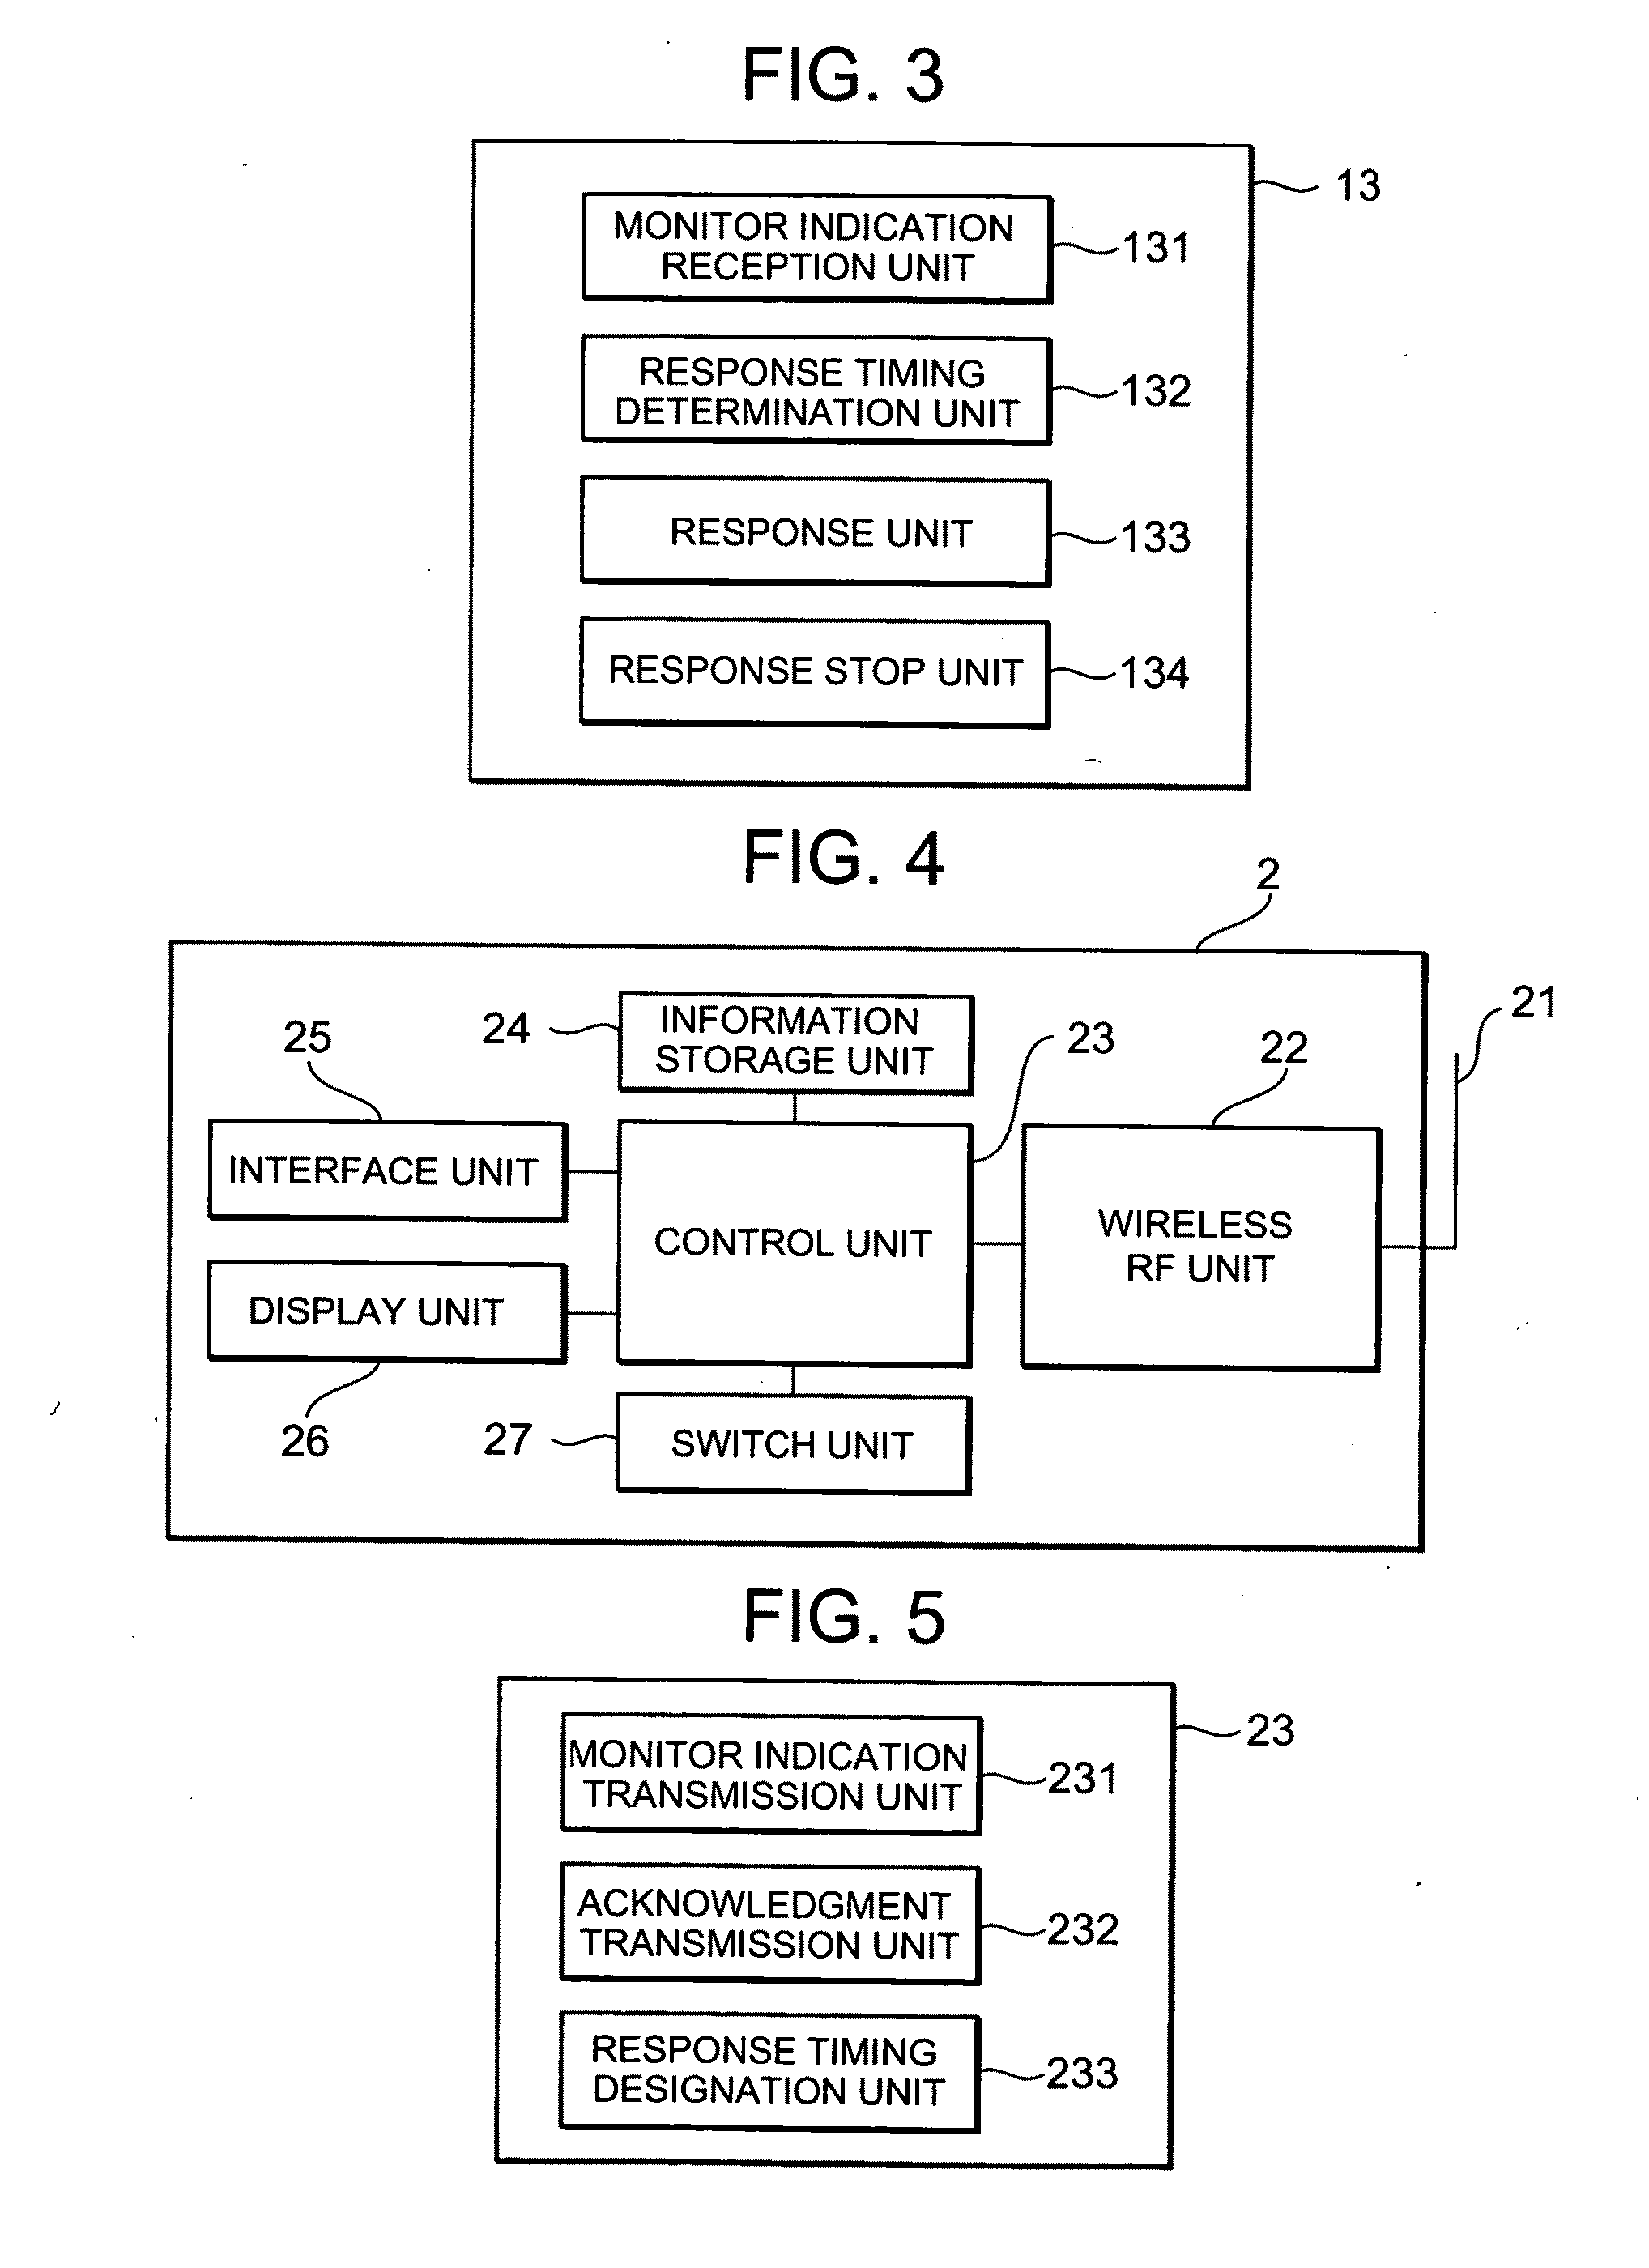 Exposure management system, dosimeter, and wireless relay device